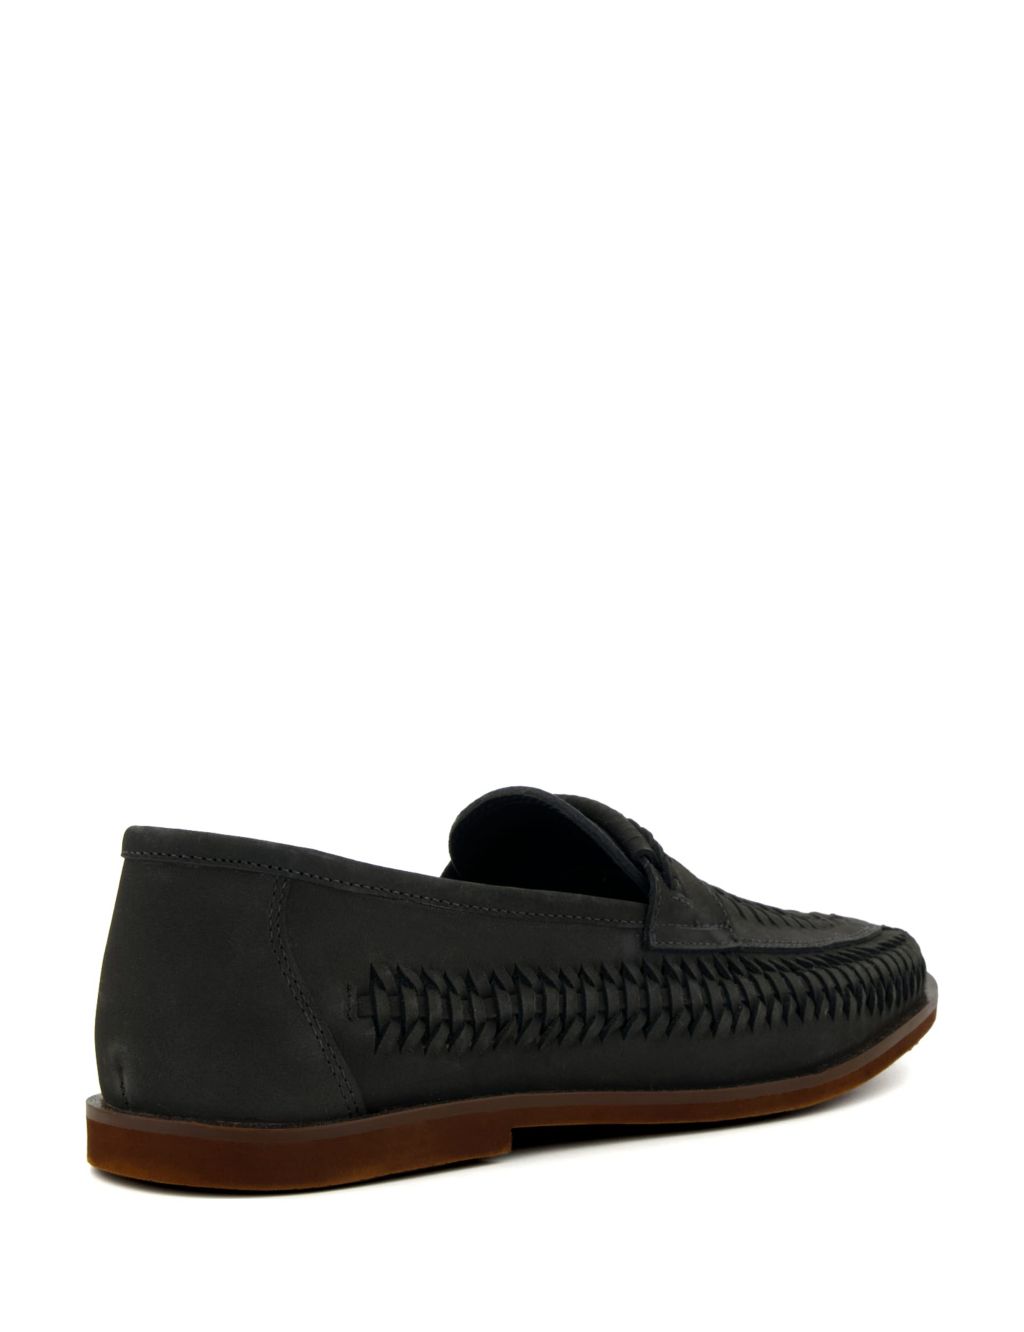 Leather Woven Flat Loafers image 4